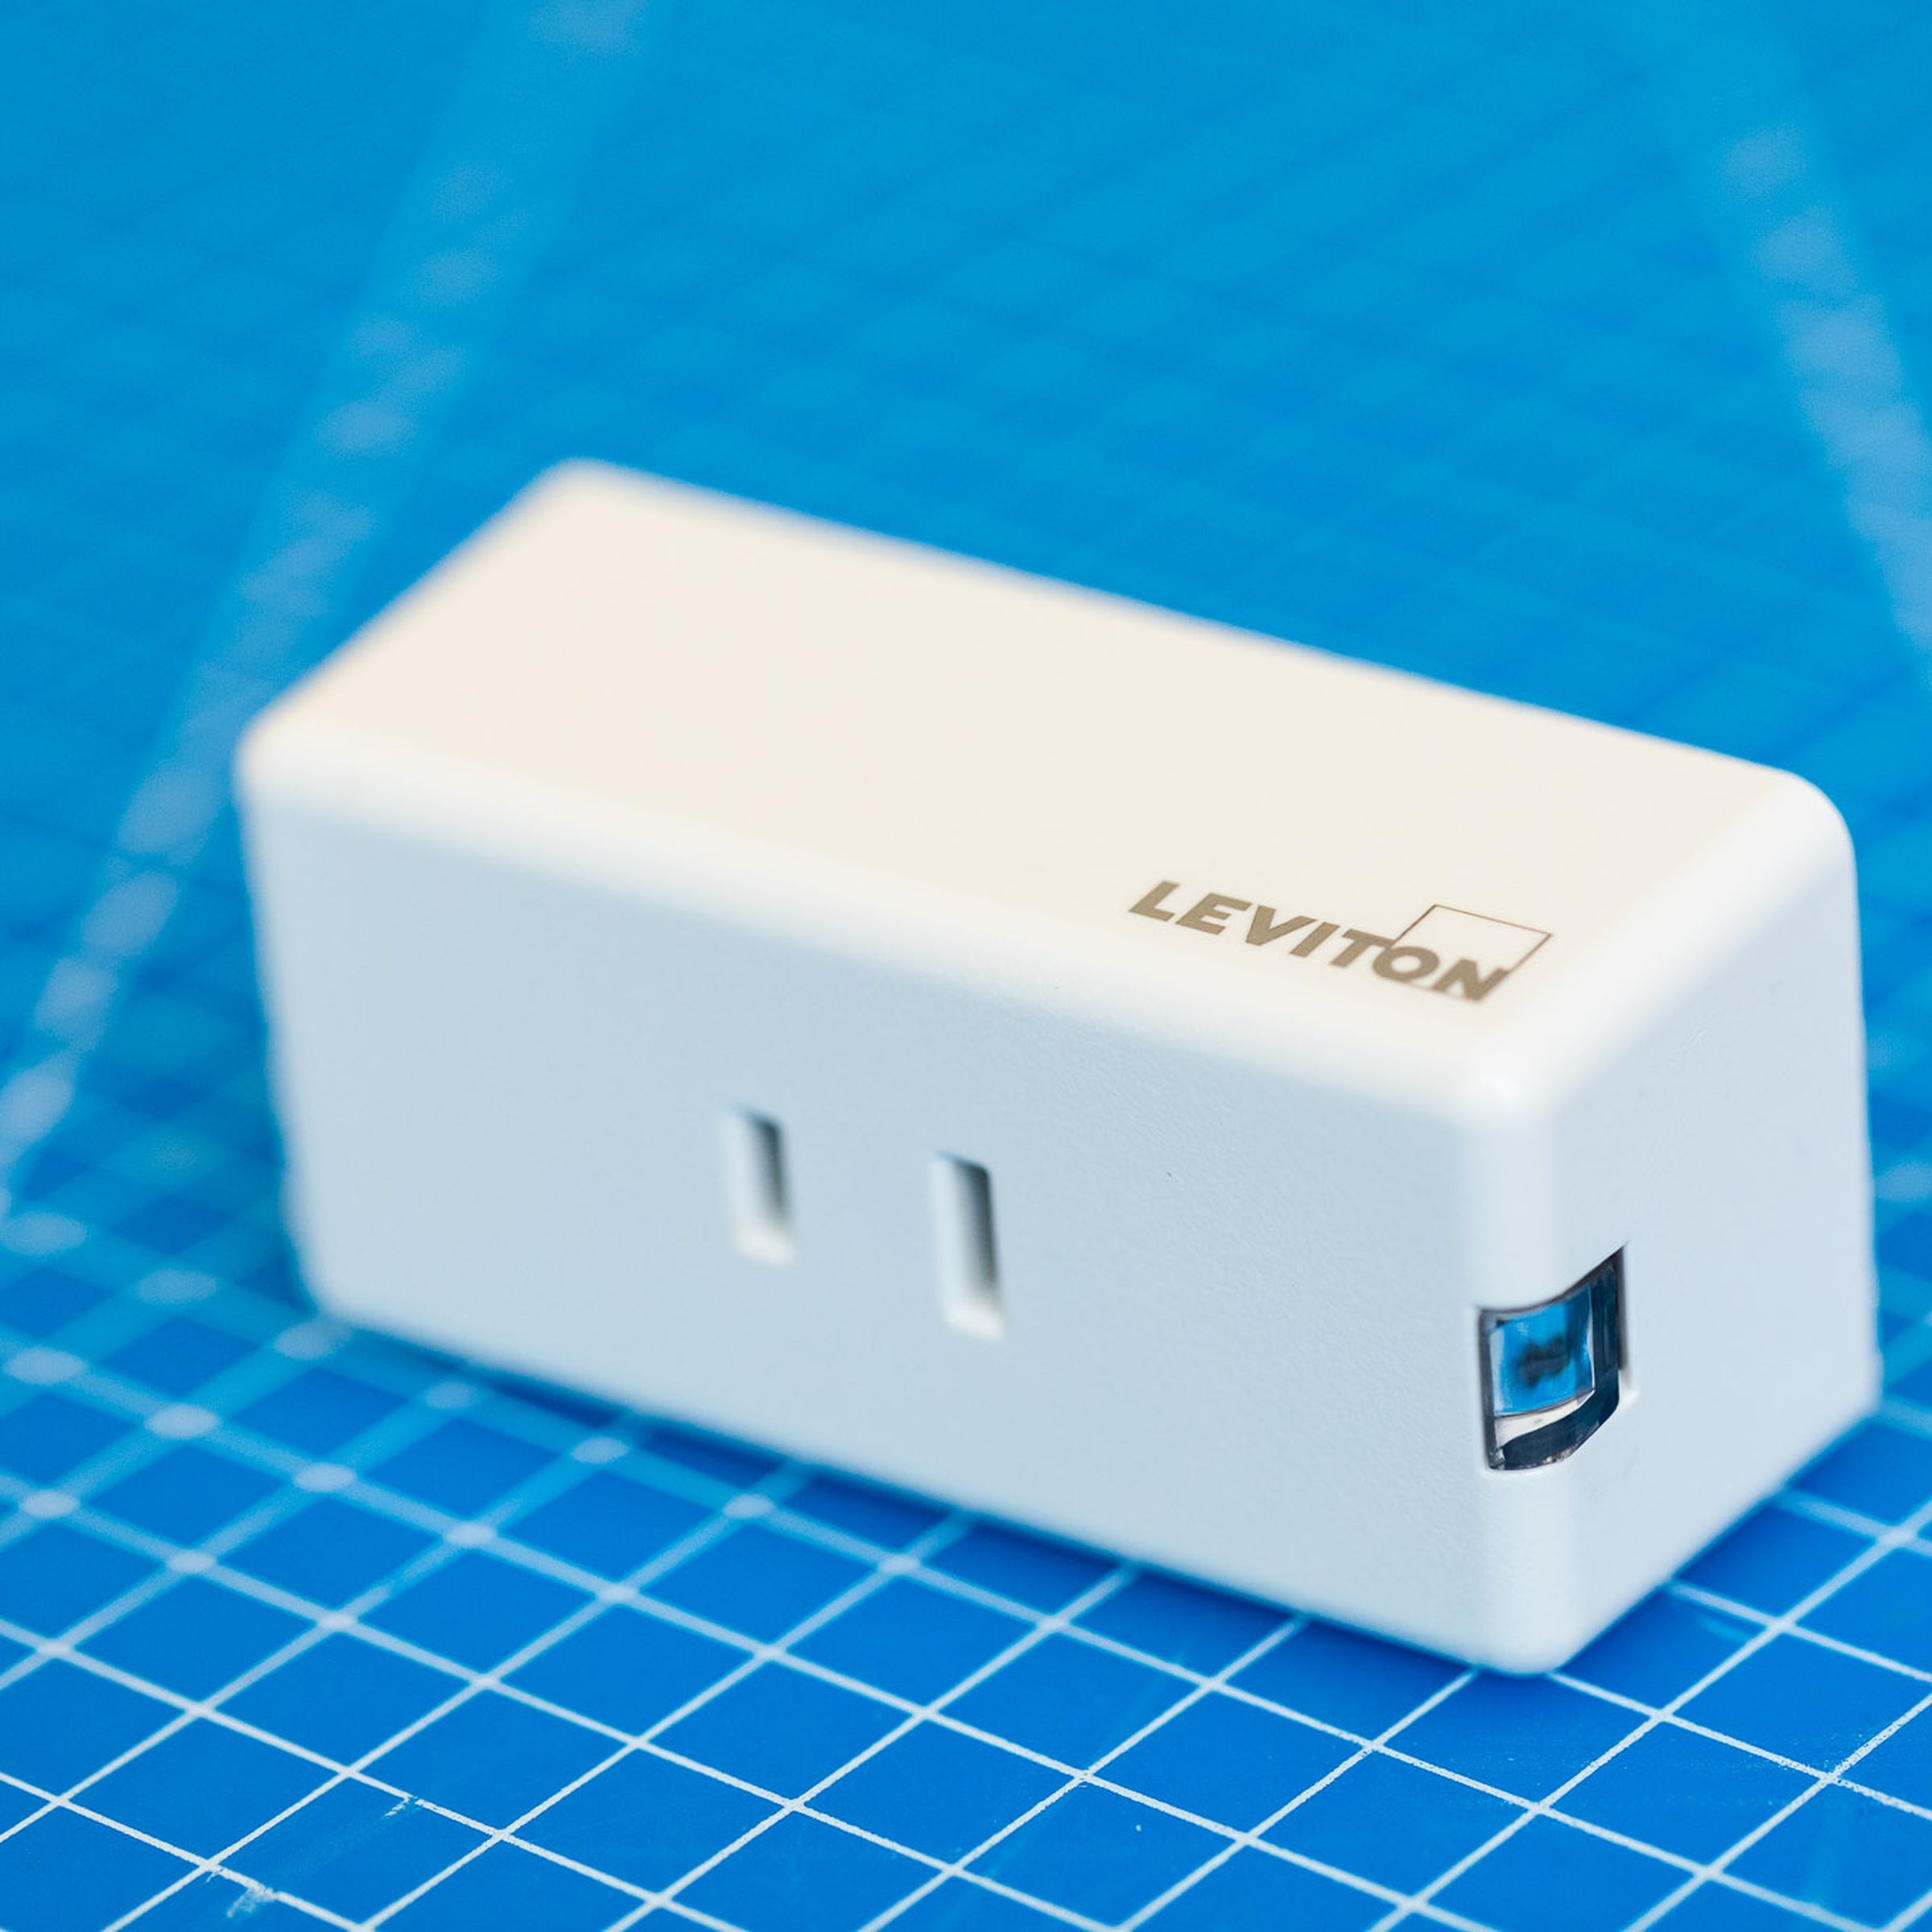 The Leviton smart dimmer, a white rectangular prism with a two-prong US-style AC outlet on the front.